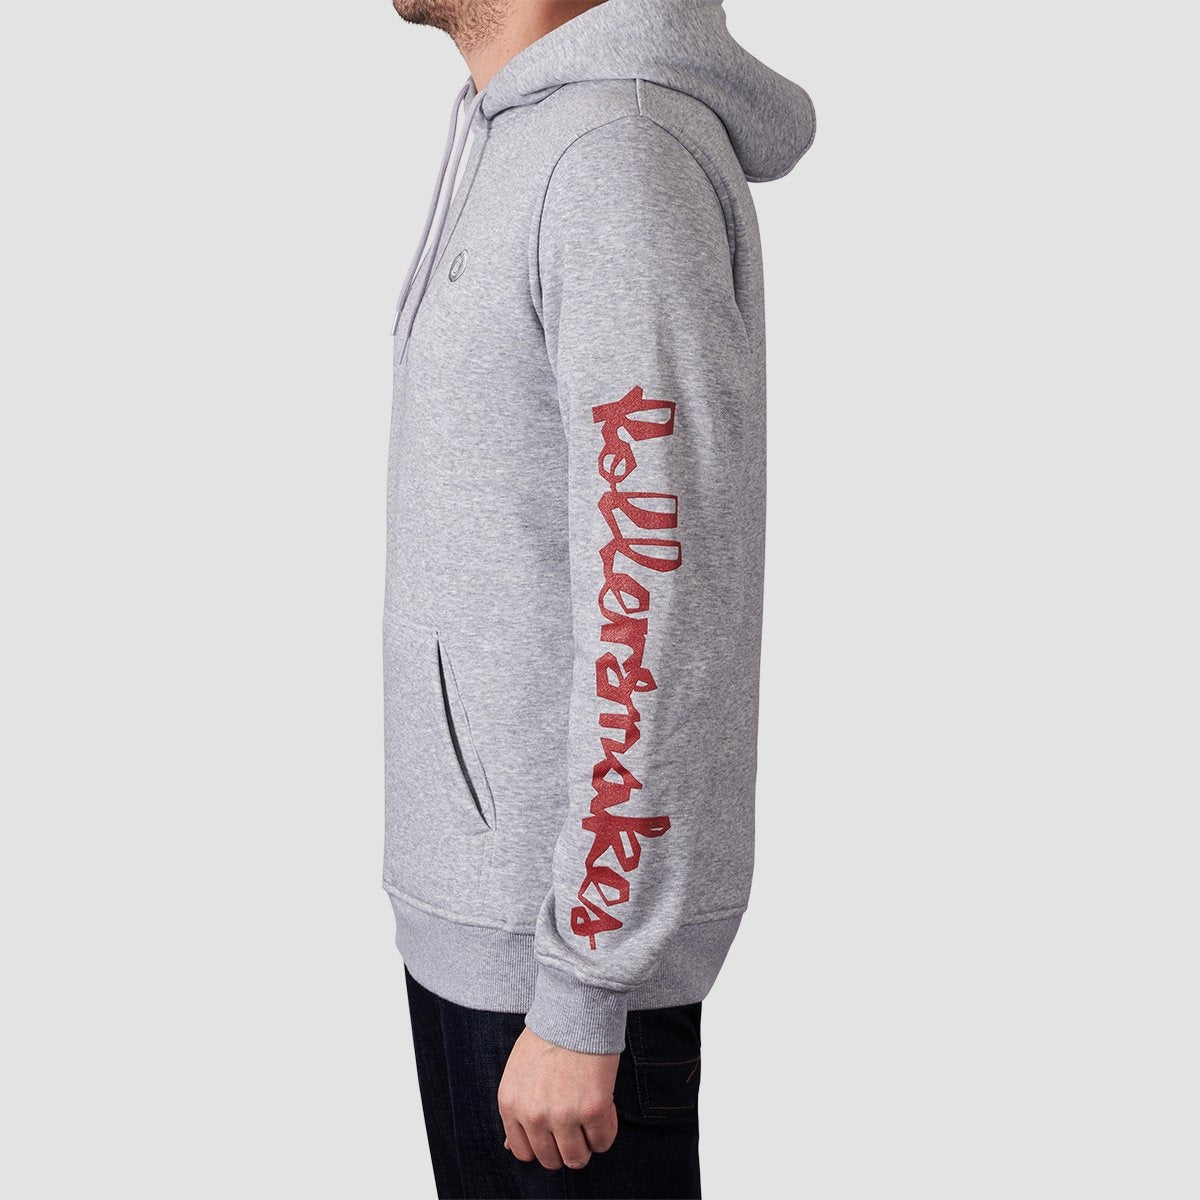 Rollersnakes Chunker Pullover Hood Heather Grey - Clothing